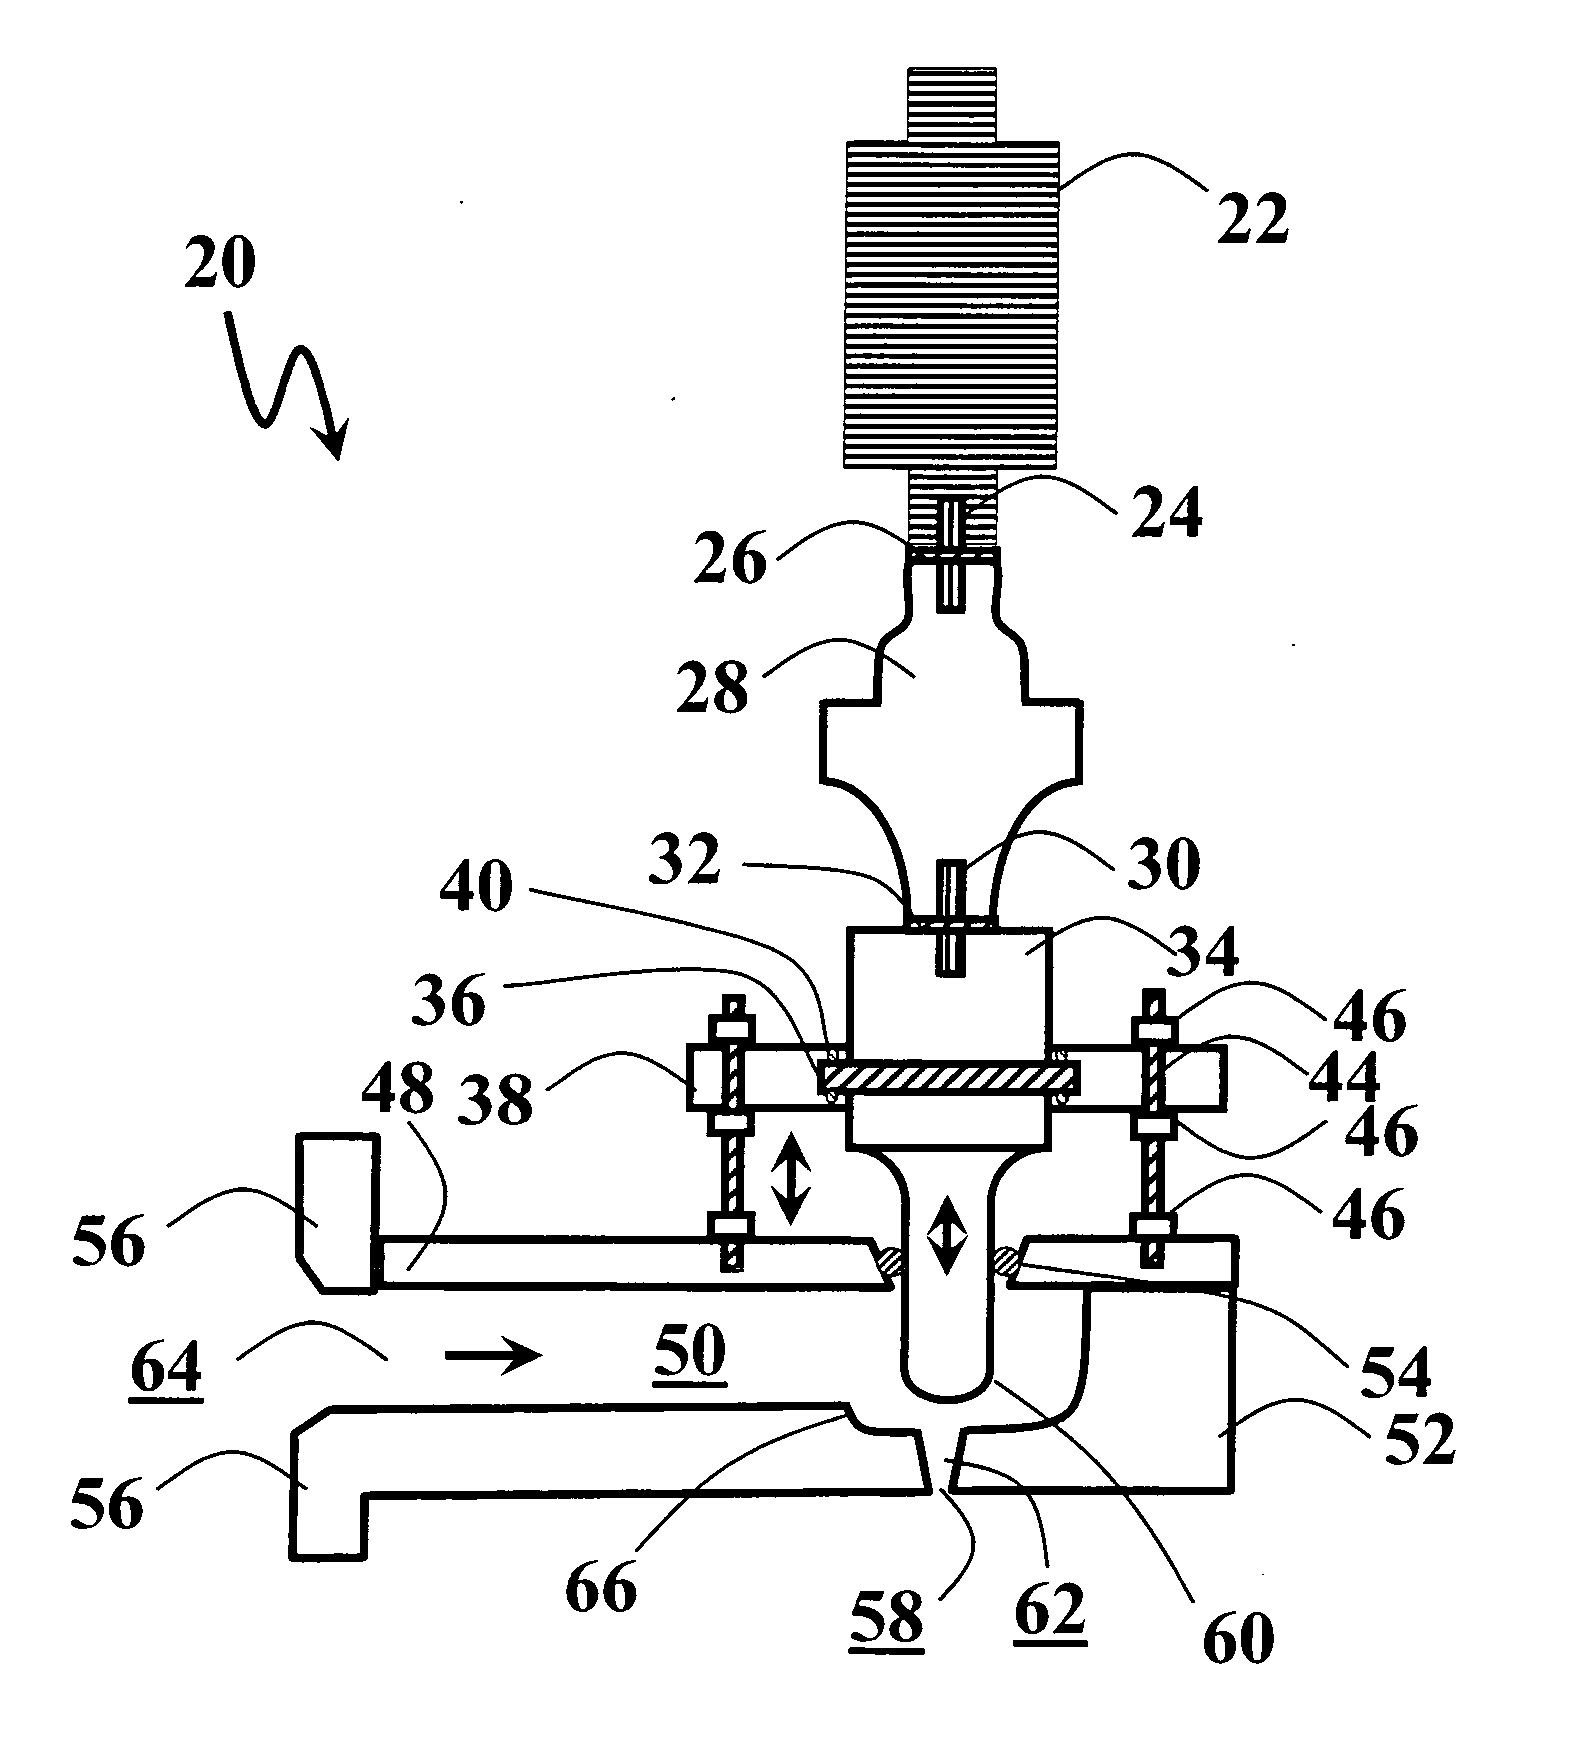 Apparatus, method and product for ultrasonic extrusion of a flowable substrate